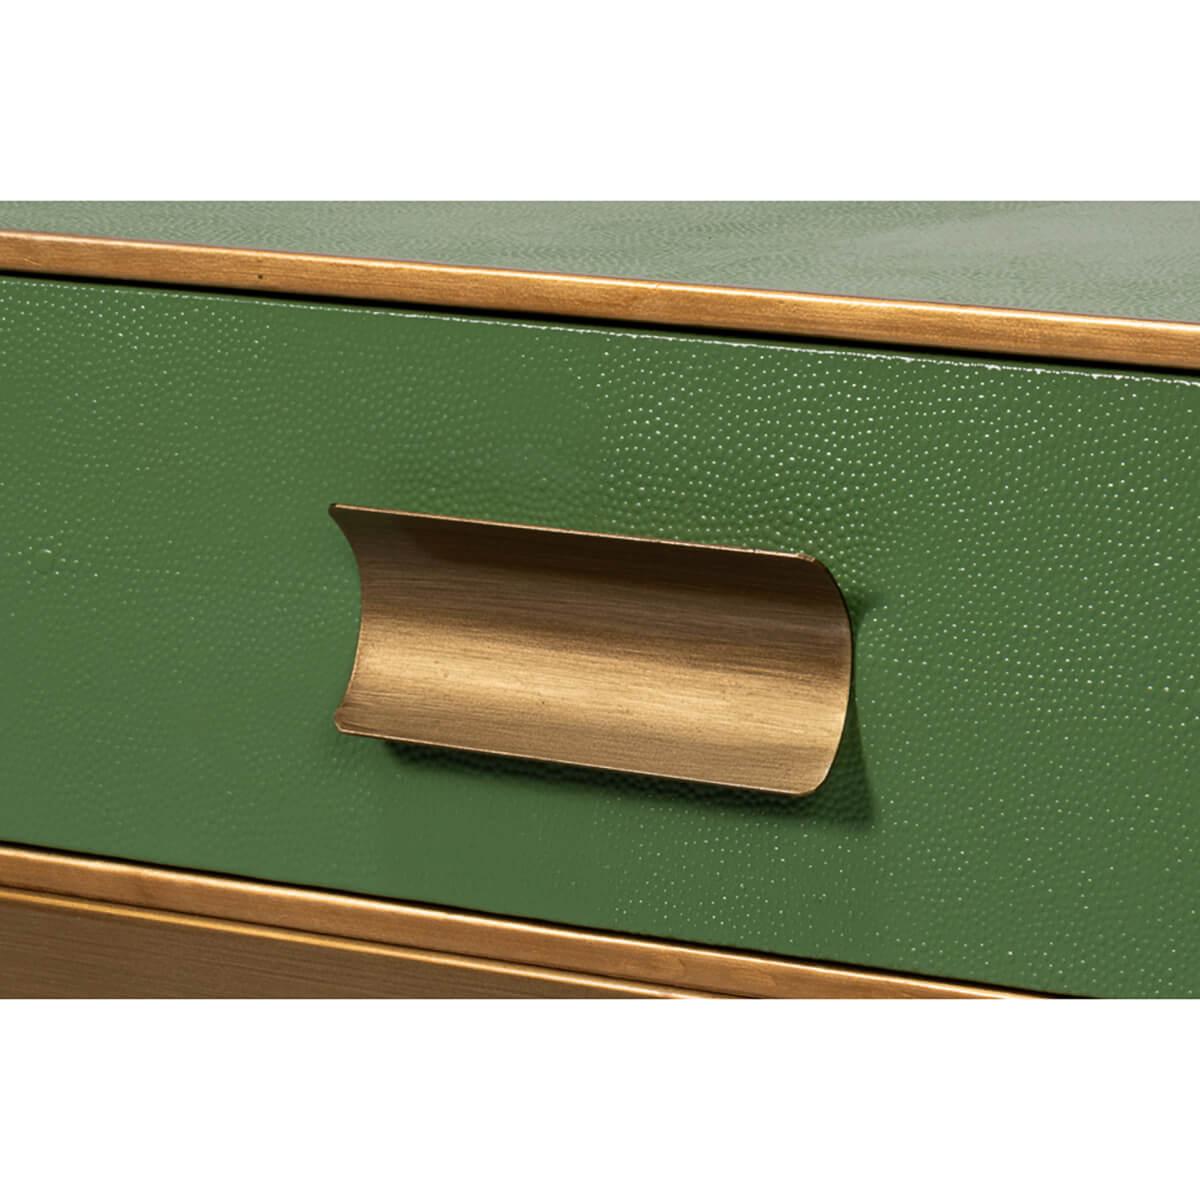 Art Deco Leather Coffee Table in Watercress Green For Sale 1